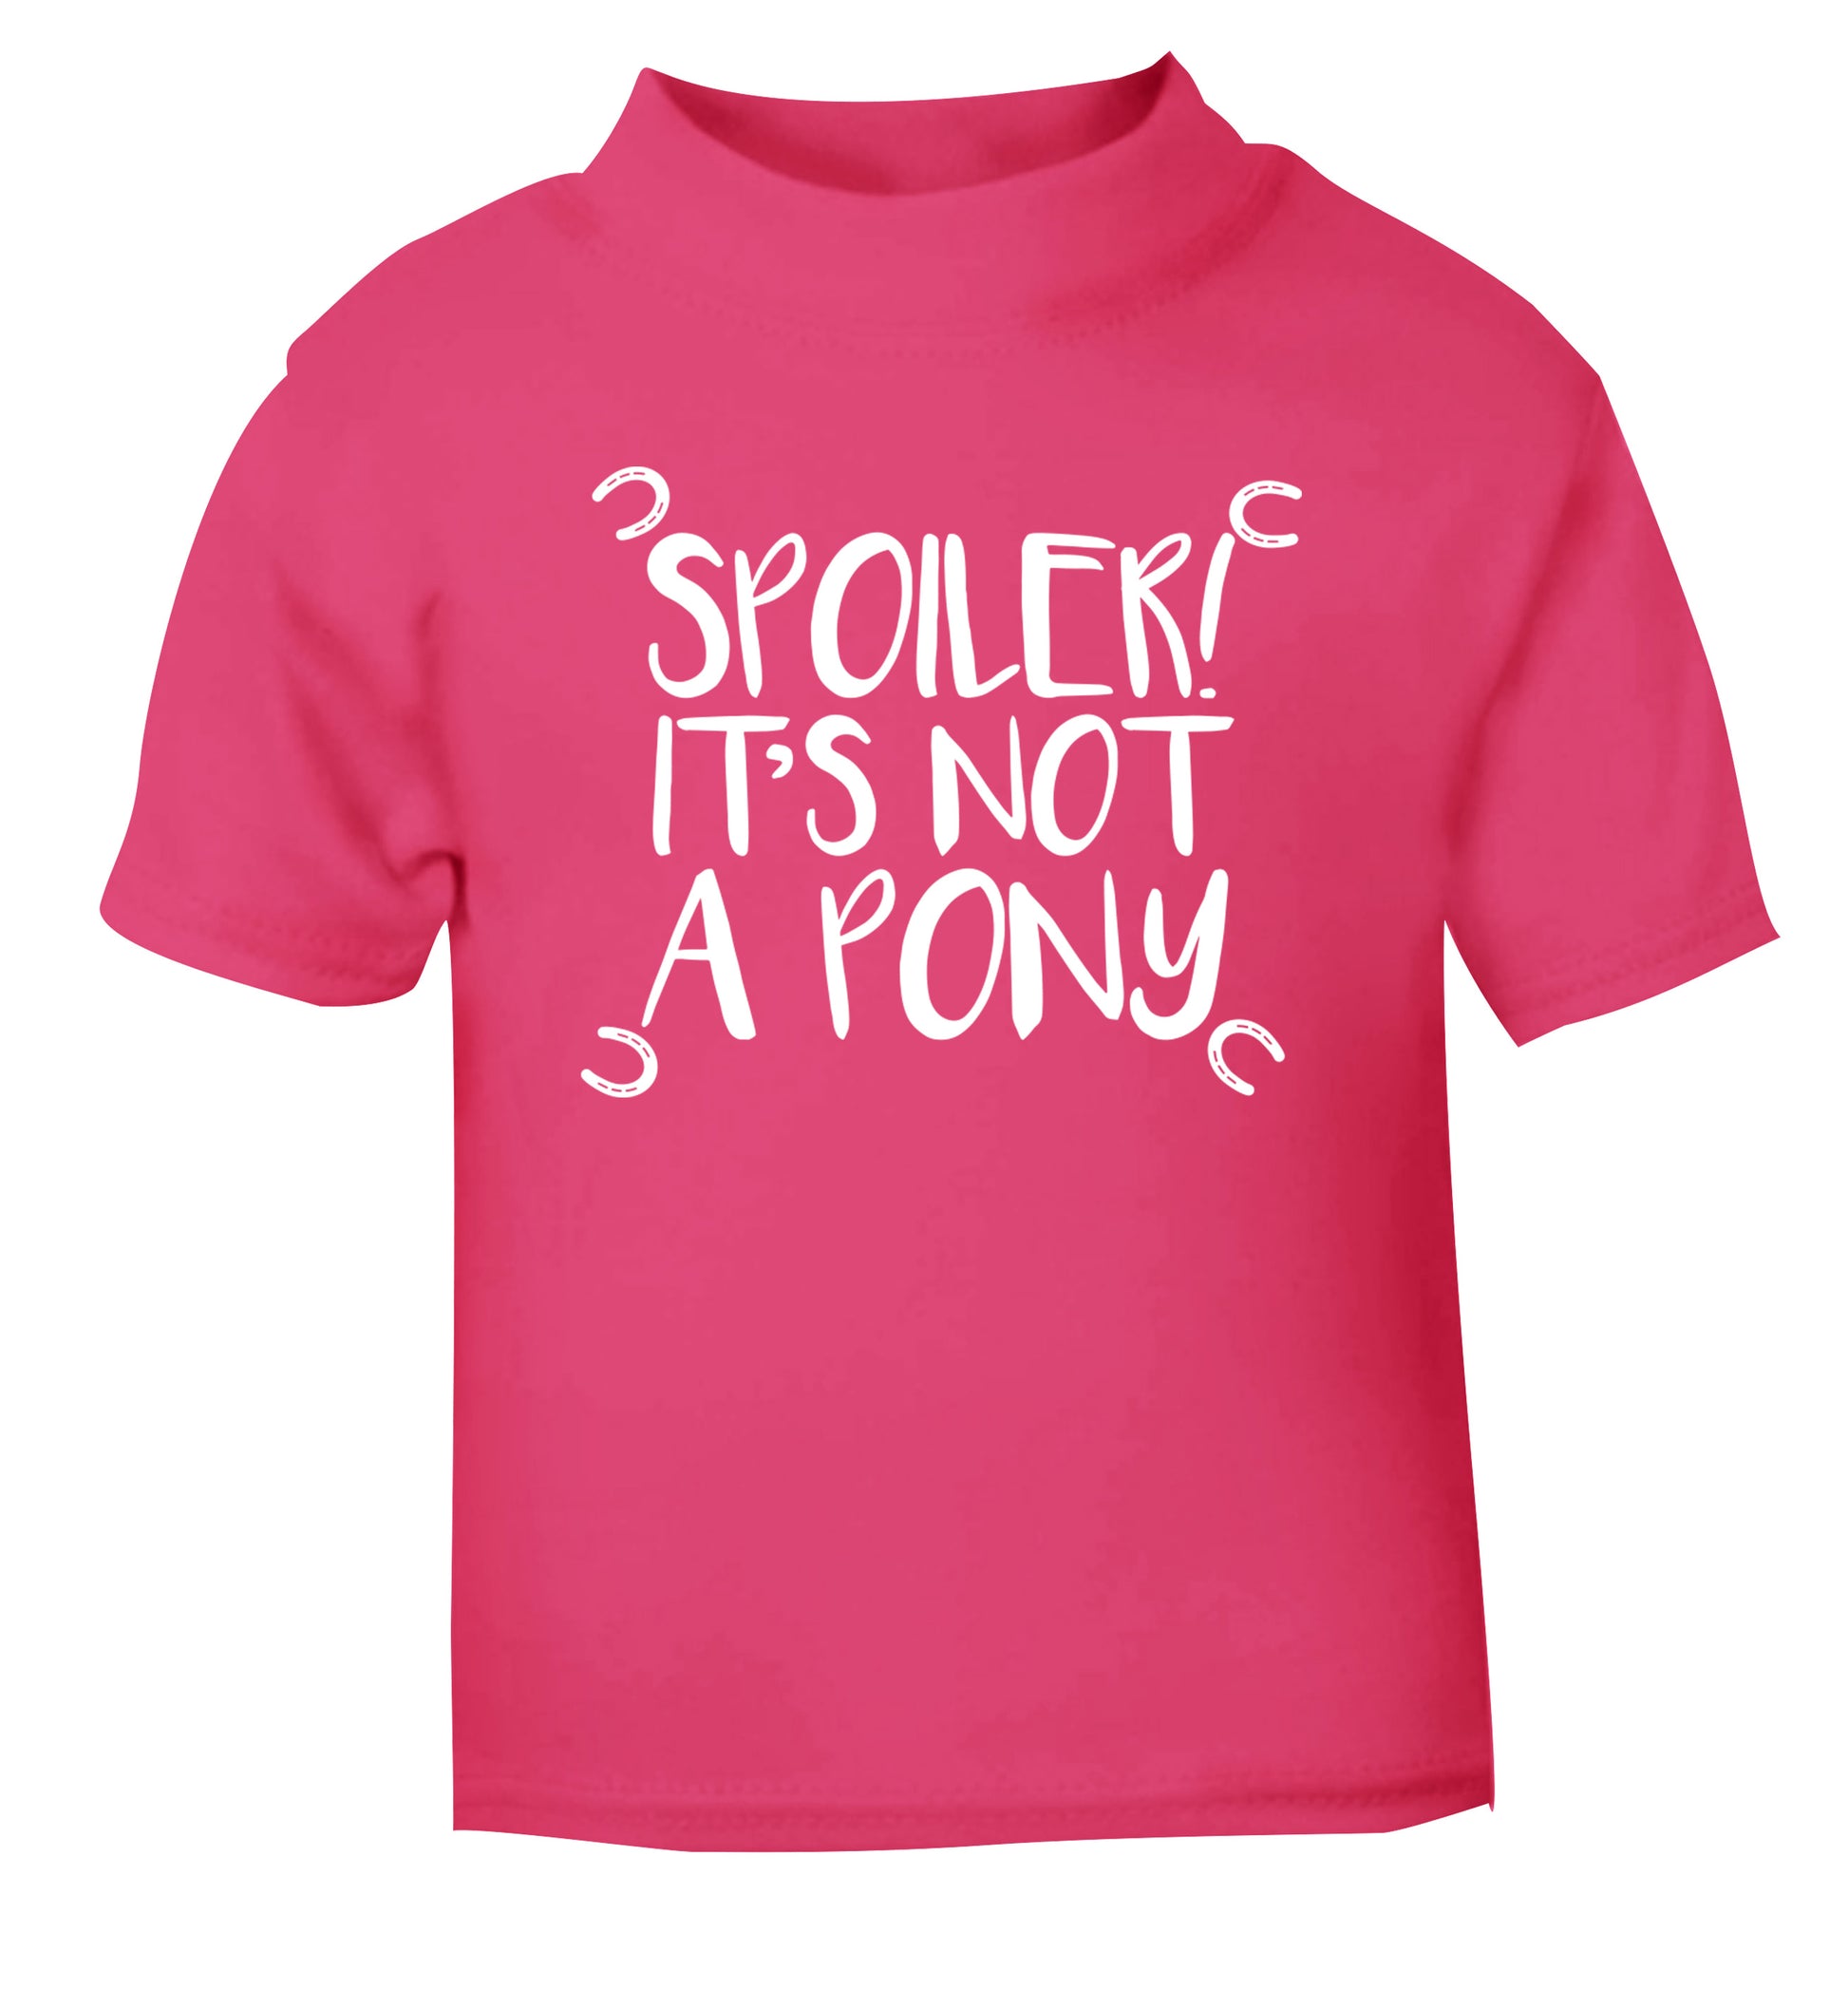 Spoiler it's not a pony pink Baby Toddler Tshirt 2 Years